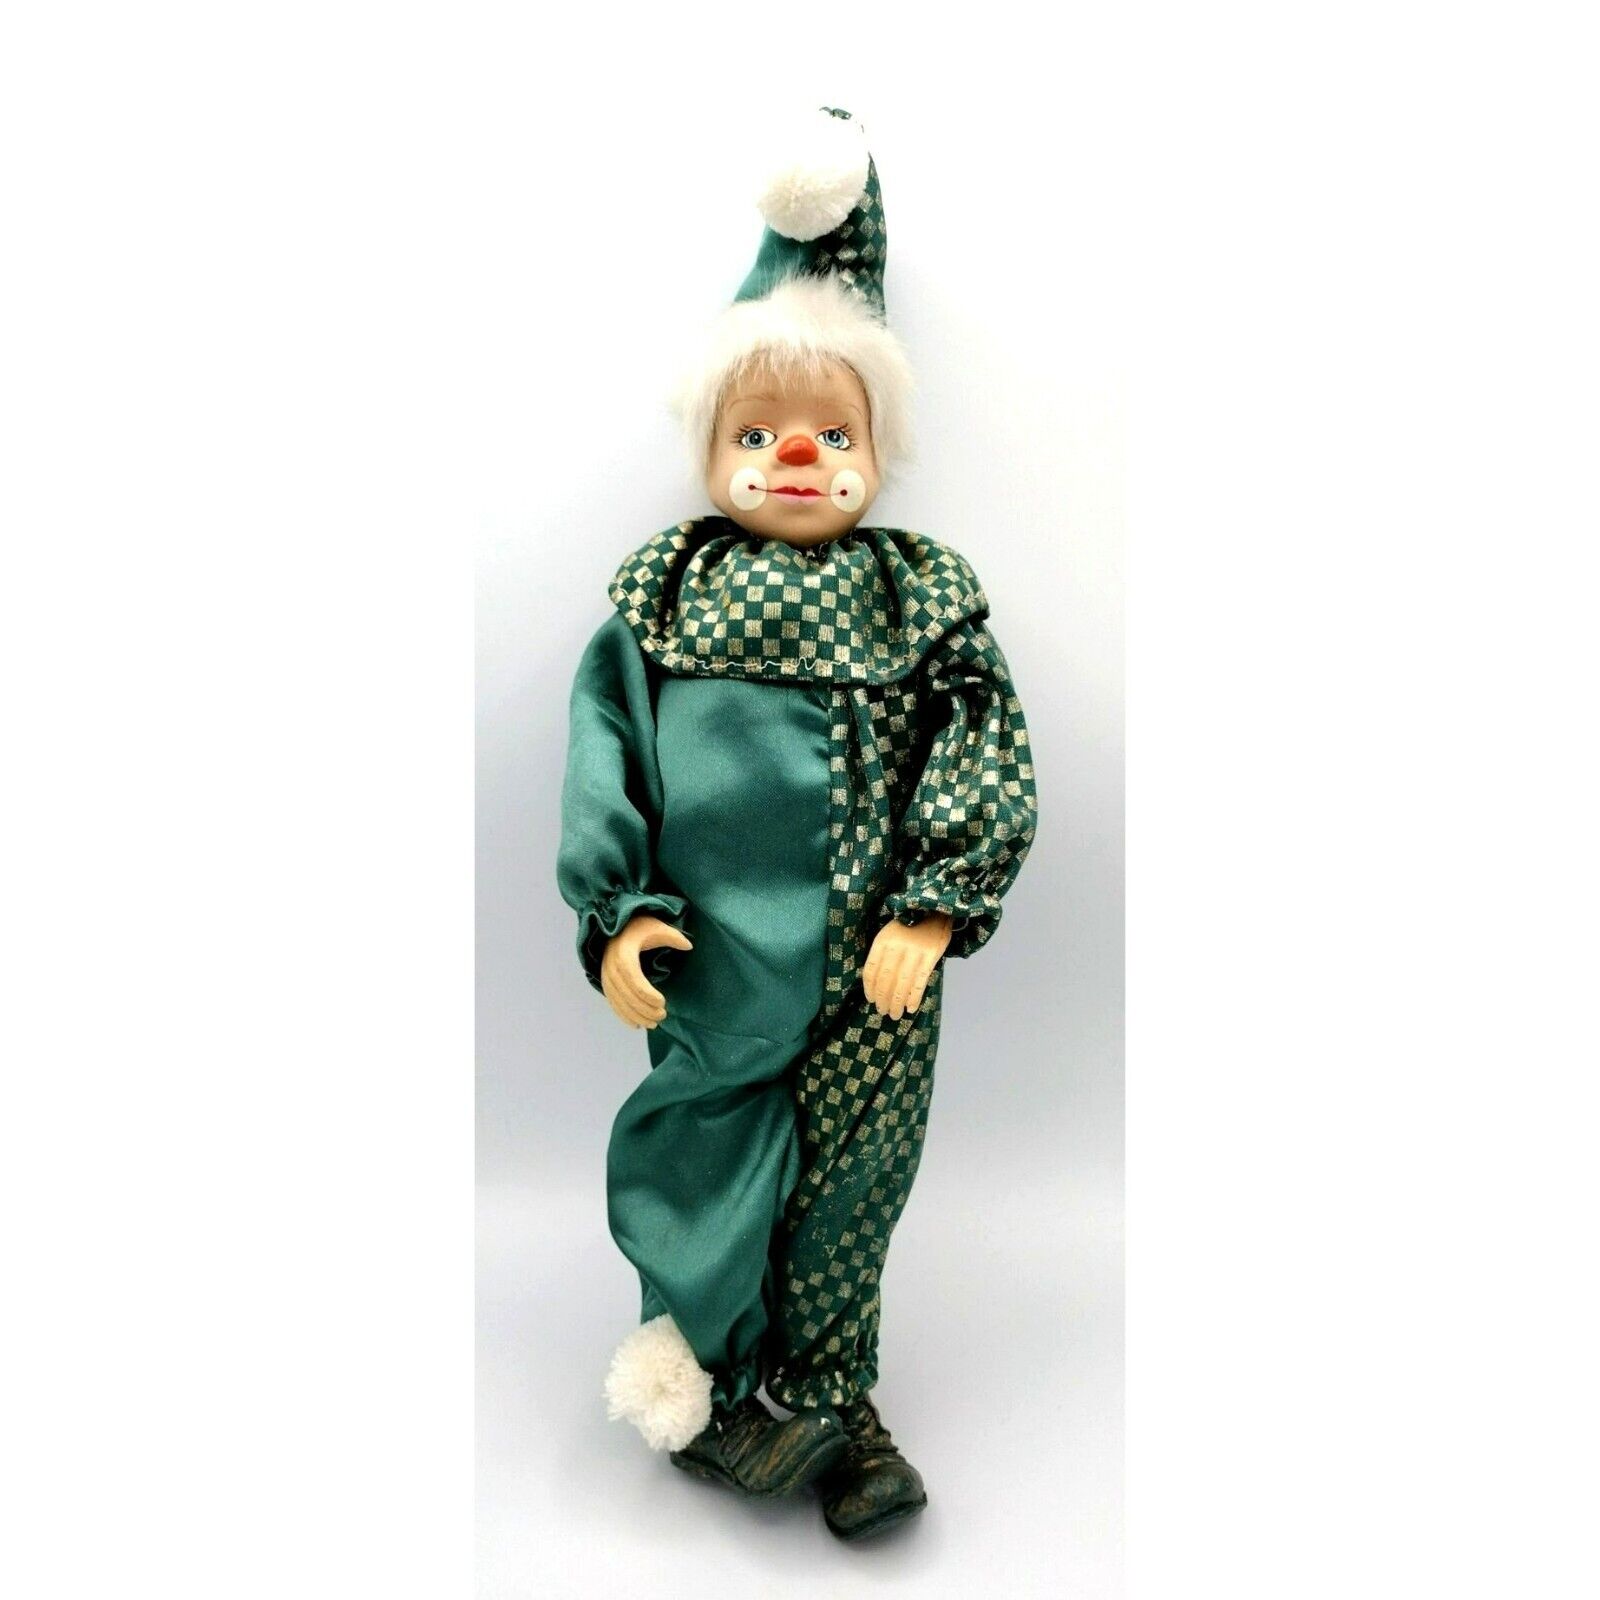 Ganz Green and Gold Clown Doll Porcelain with Soft Body Vintage Creepy But Cute